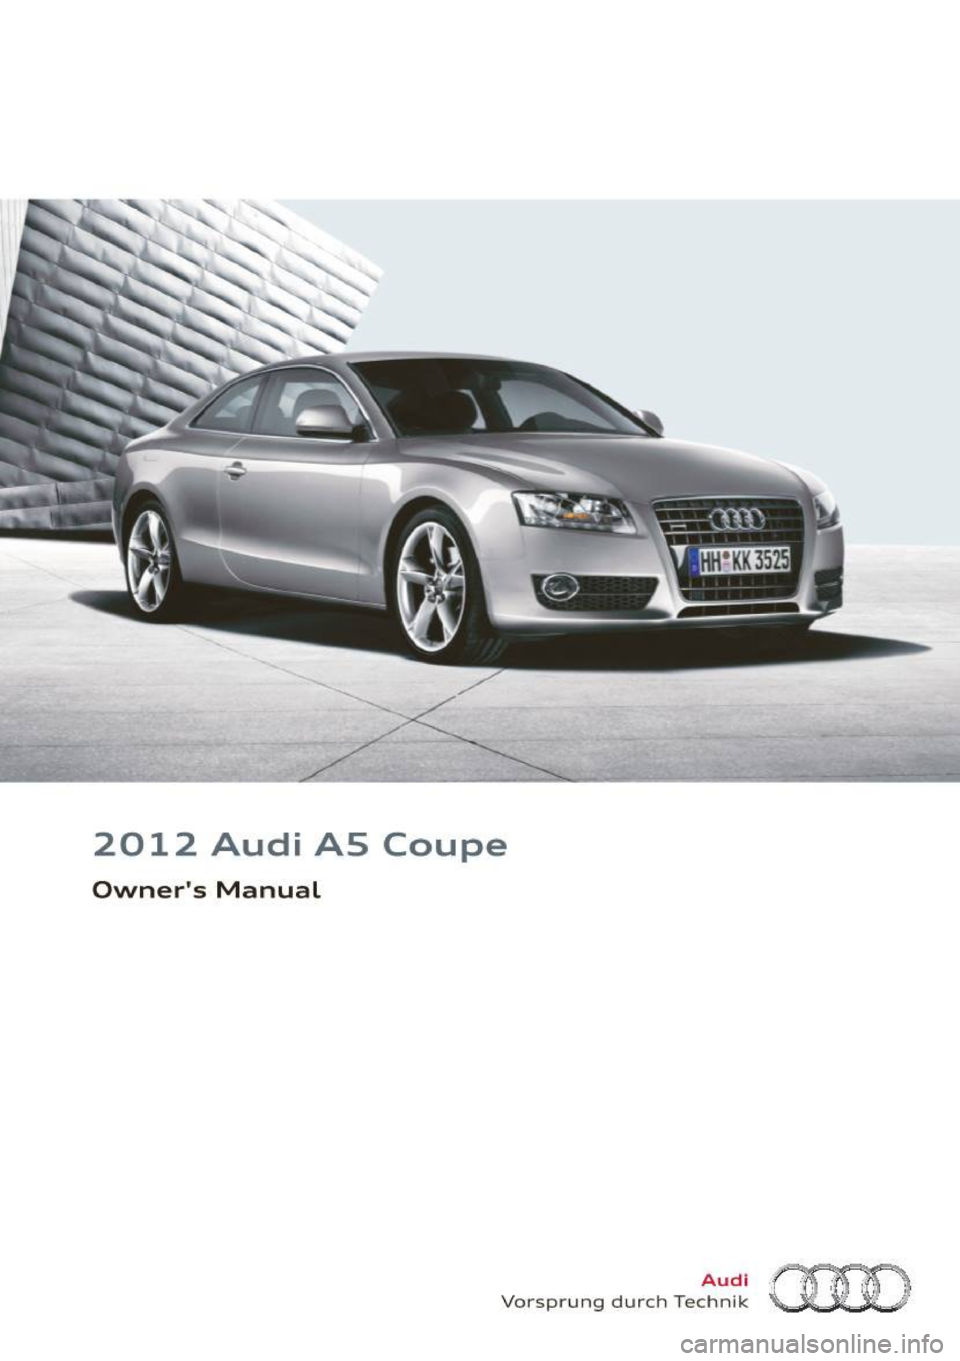 AUDI A5 COUPE 2012  Owners Manual 2012  Audi  AS  Coupe 
Owners Manual 
Audi 
Vorsprung  du rch  Technik  